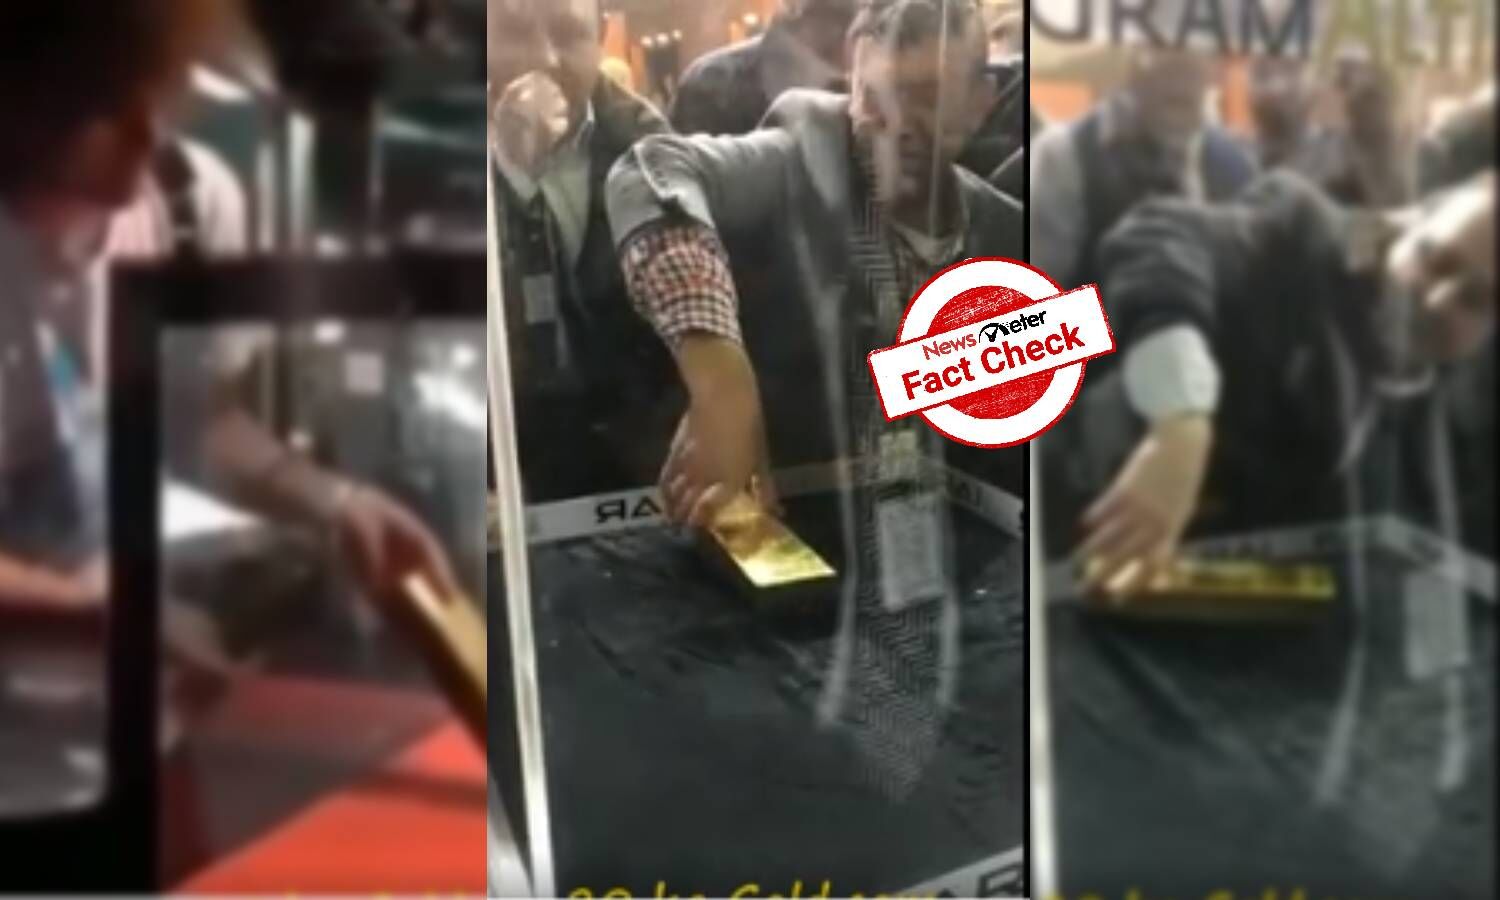 Dubai airport didn't host '20 kg Gold bar challenge', viral claims are fake